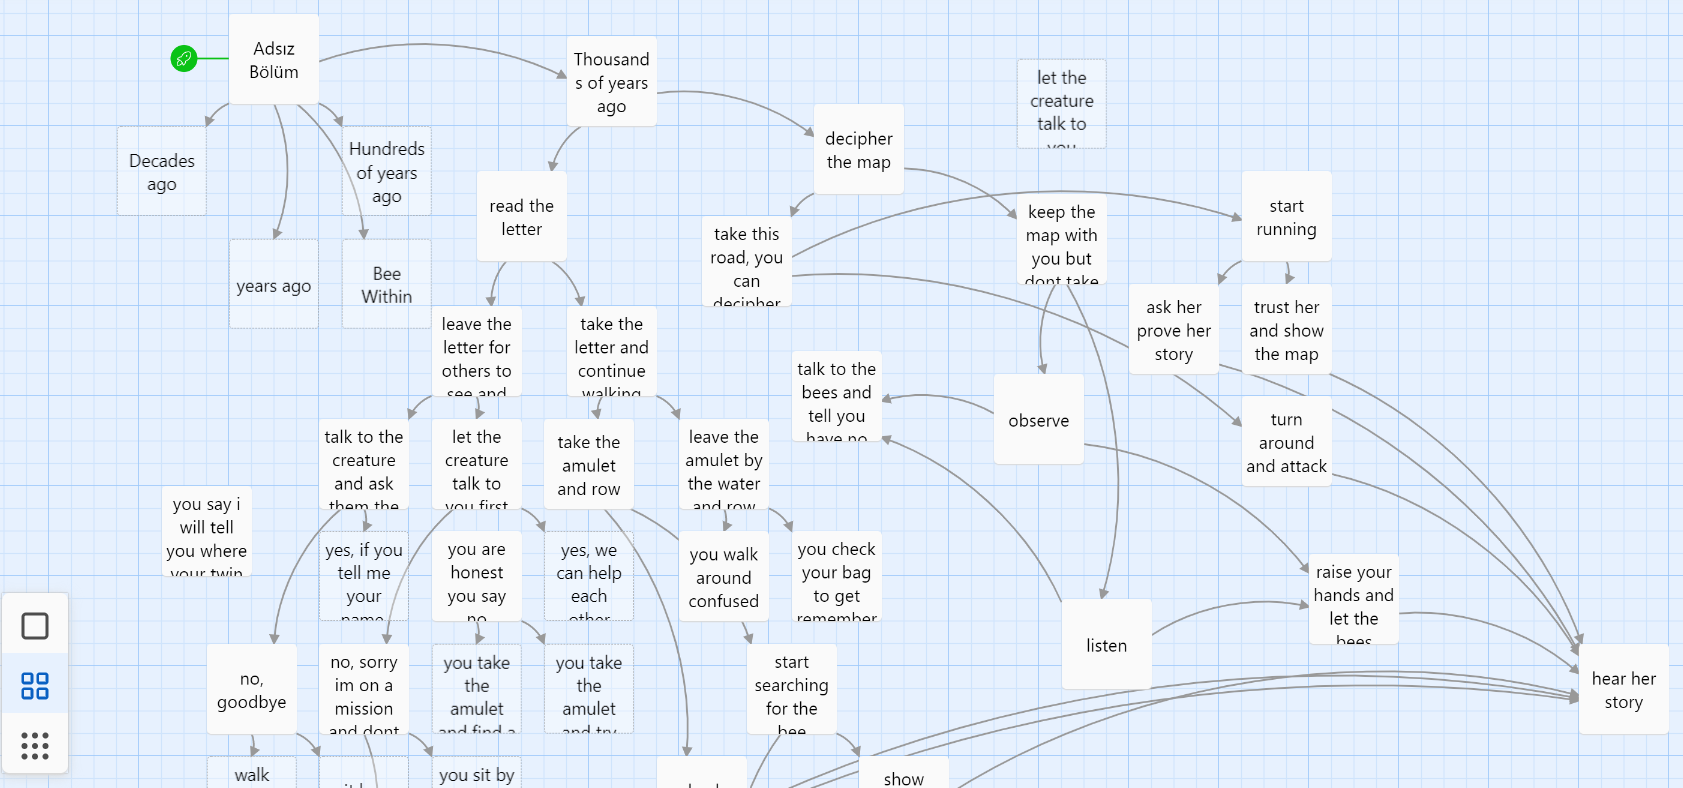 The twine map of text based story, reachable from Bee Within.